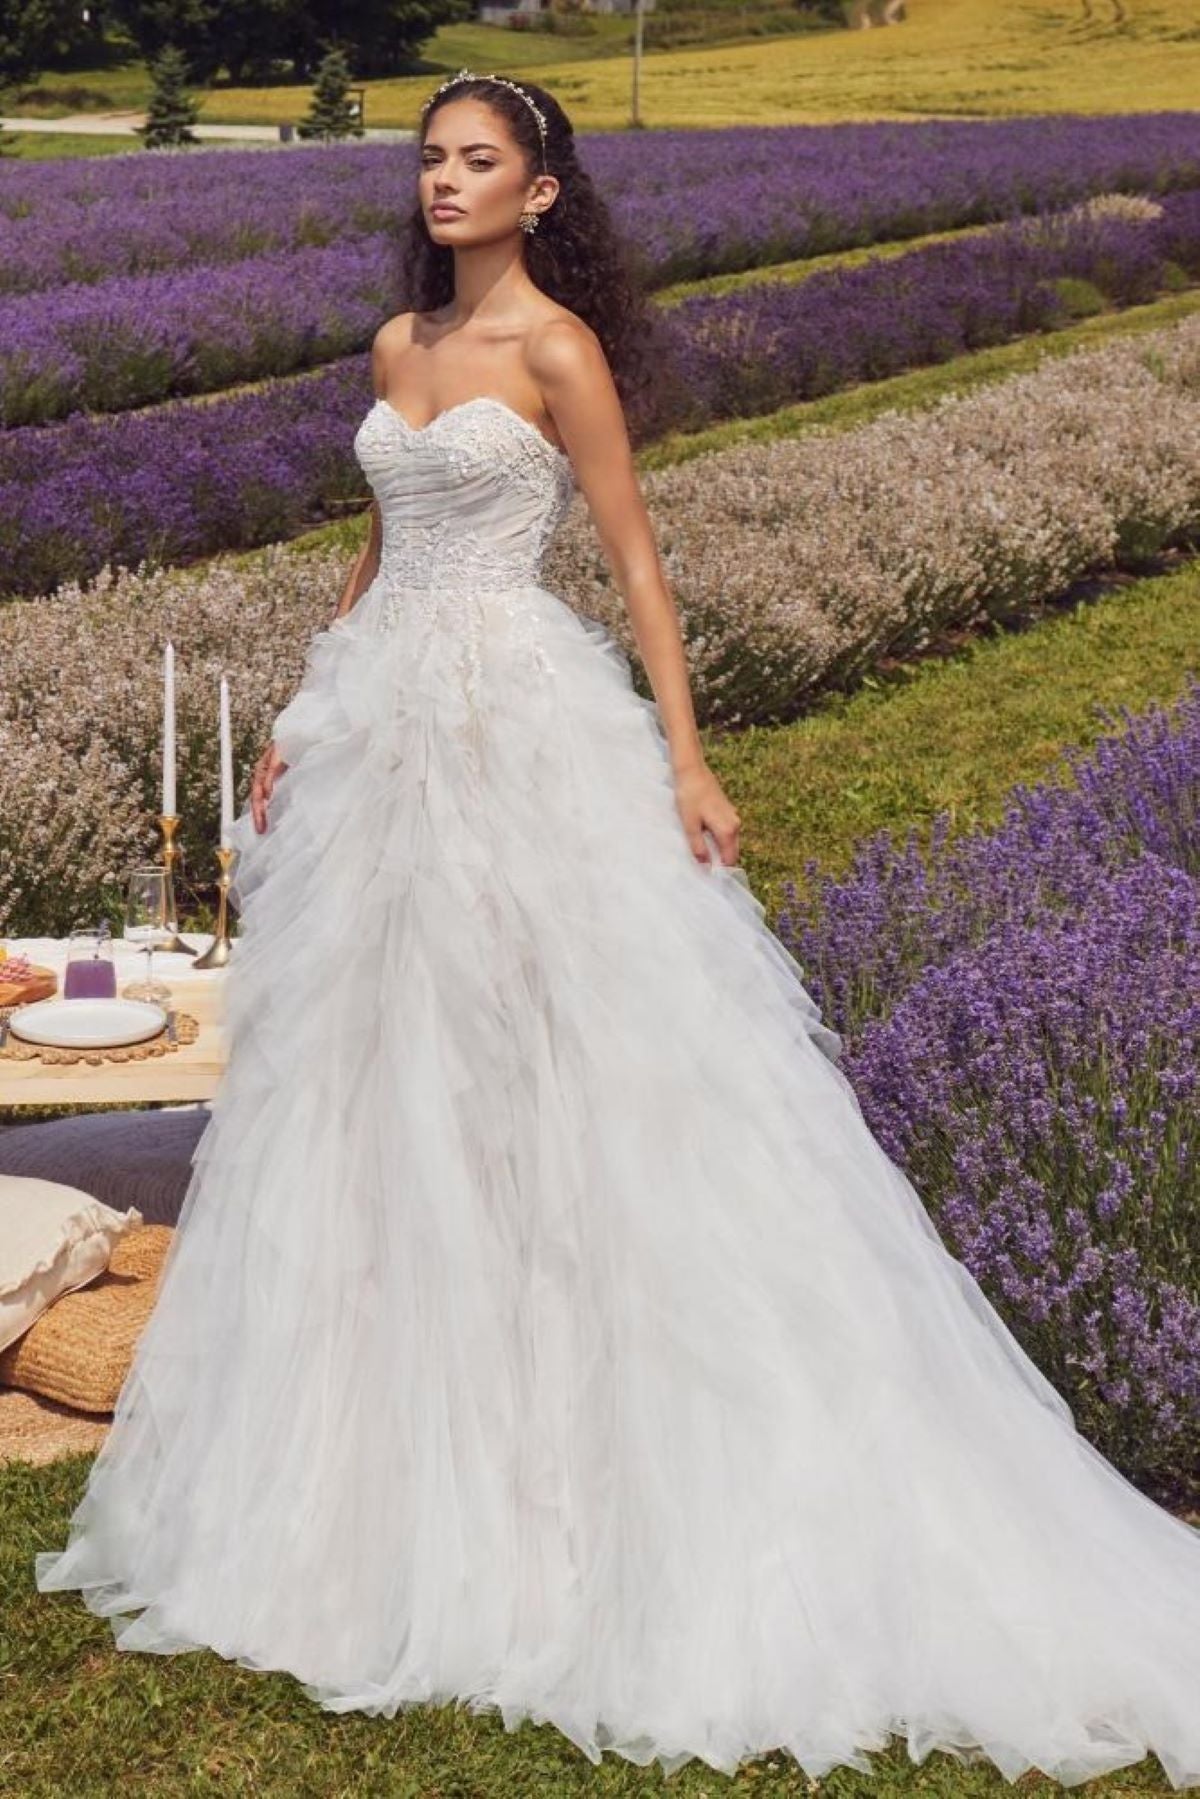 LA24101-A line Tulle Wedding Dress with Lace and Sweetheart Neckline3.jpg__PID:81bd0dd6-8808-4d2d-8821-91c5c4ca60c1